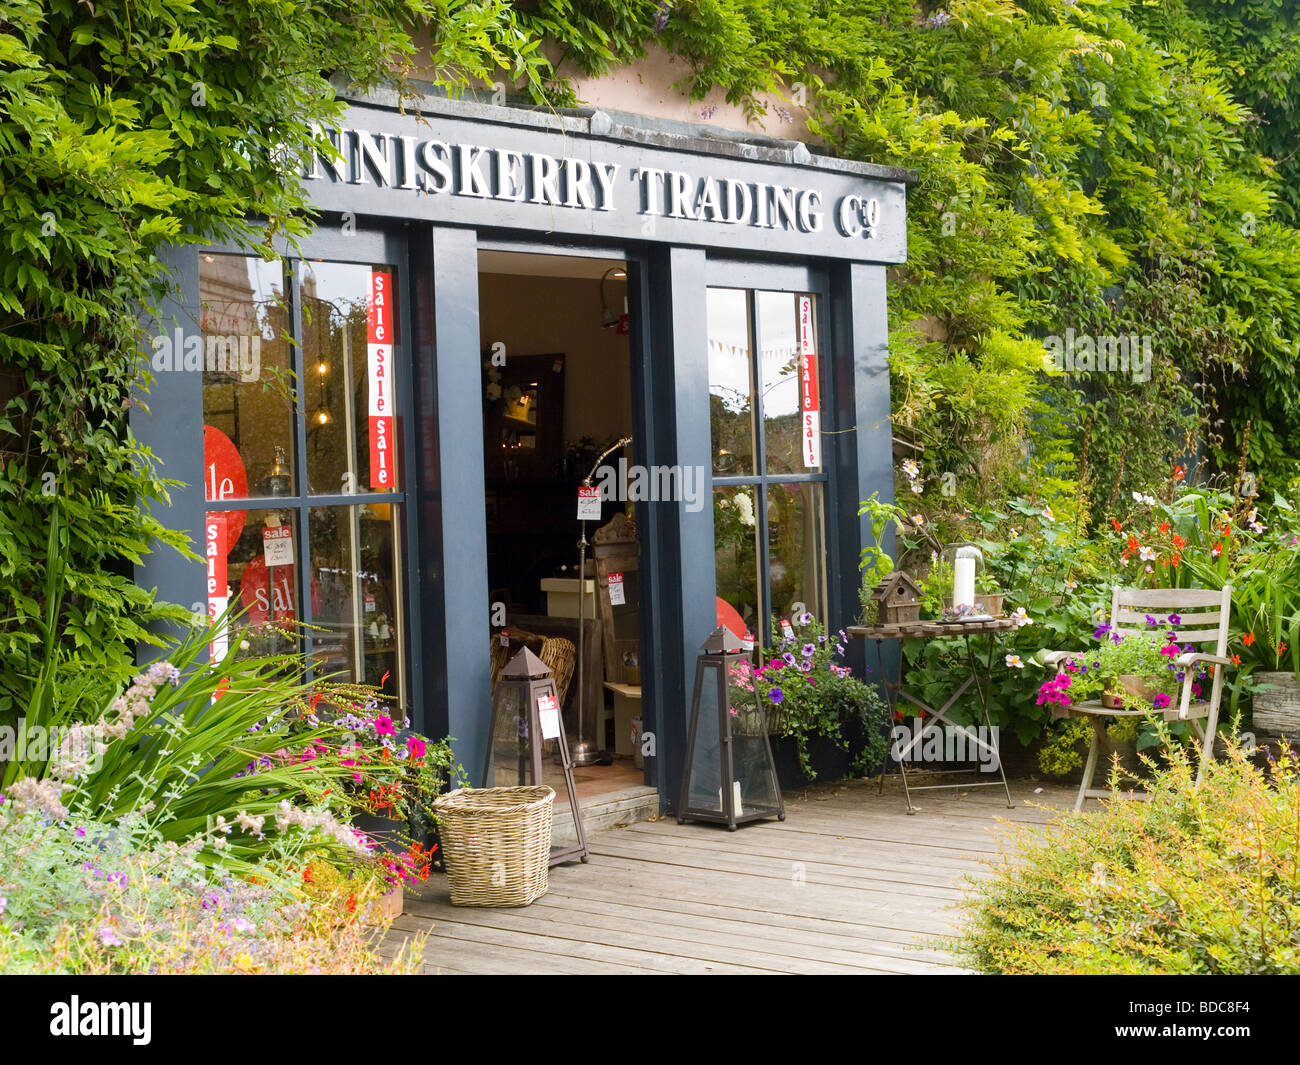 The exterior of the Enniskerry Trading Co, a shop in the village of Enniskerry, County Wicklow Ireland Stock Photo